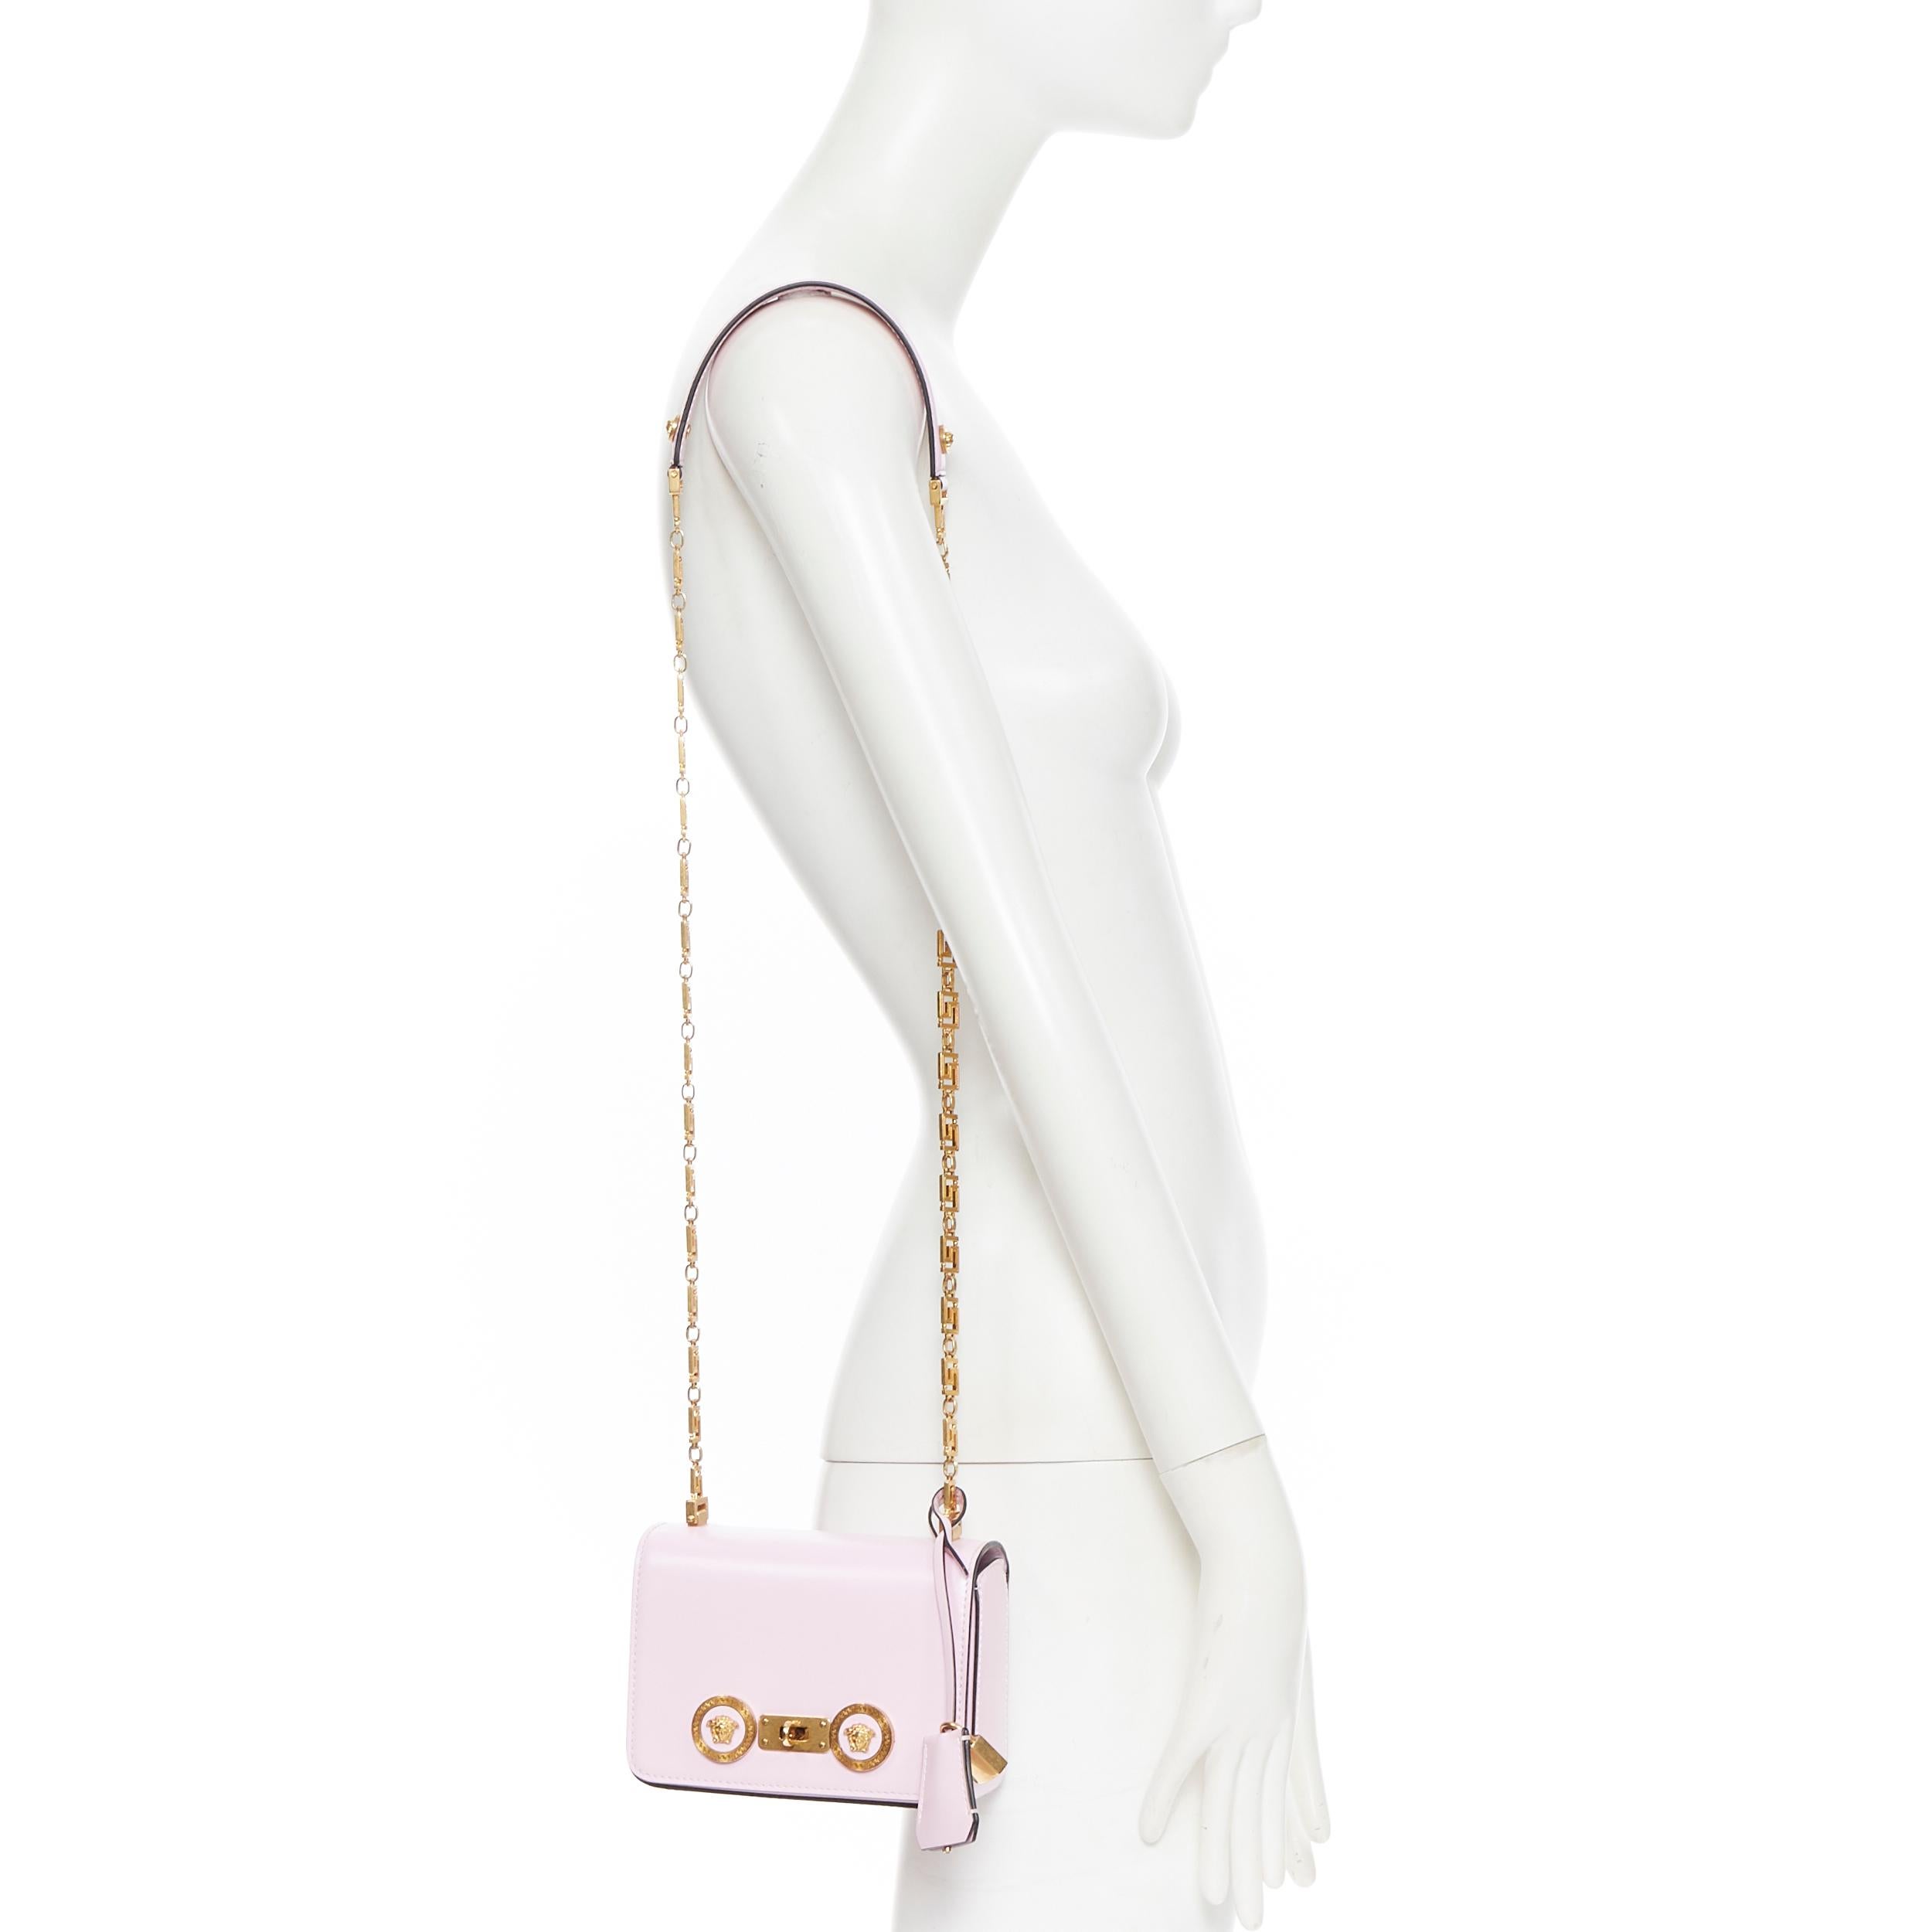 new VERSACE 2018 Tribute Icon pink gold Medusa coin Greca chain crossbody bag 
Reference: TGAS/A05066 
Brand: Versace 
Designer: Donatella Versace 
Model: Tribute Icon bag 
Collection: 2018 
Material: Leather 
Color: Pink 
Pattern: Solid 
Closure: